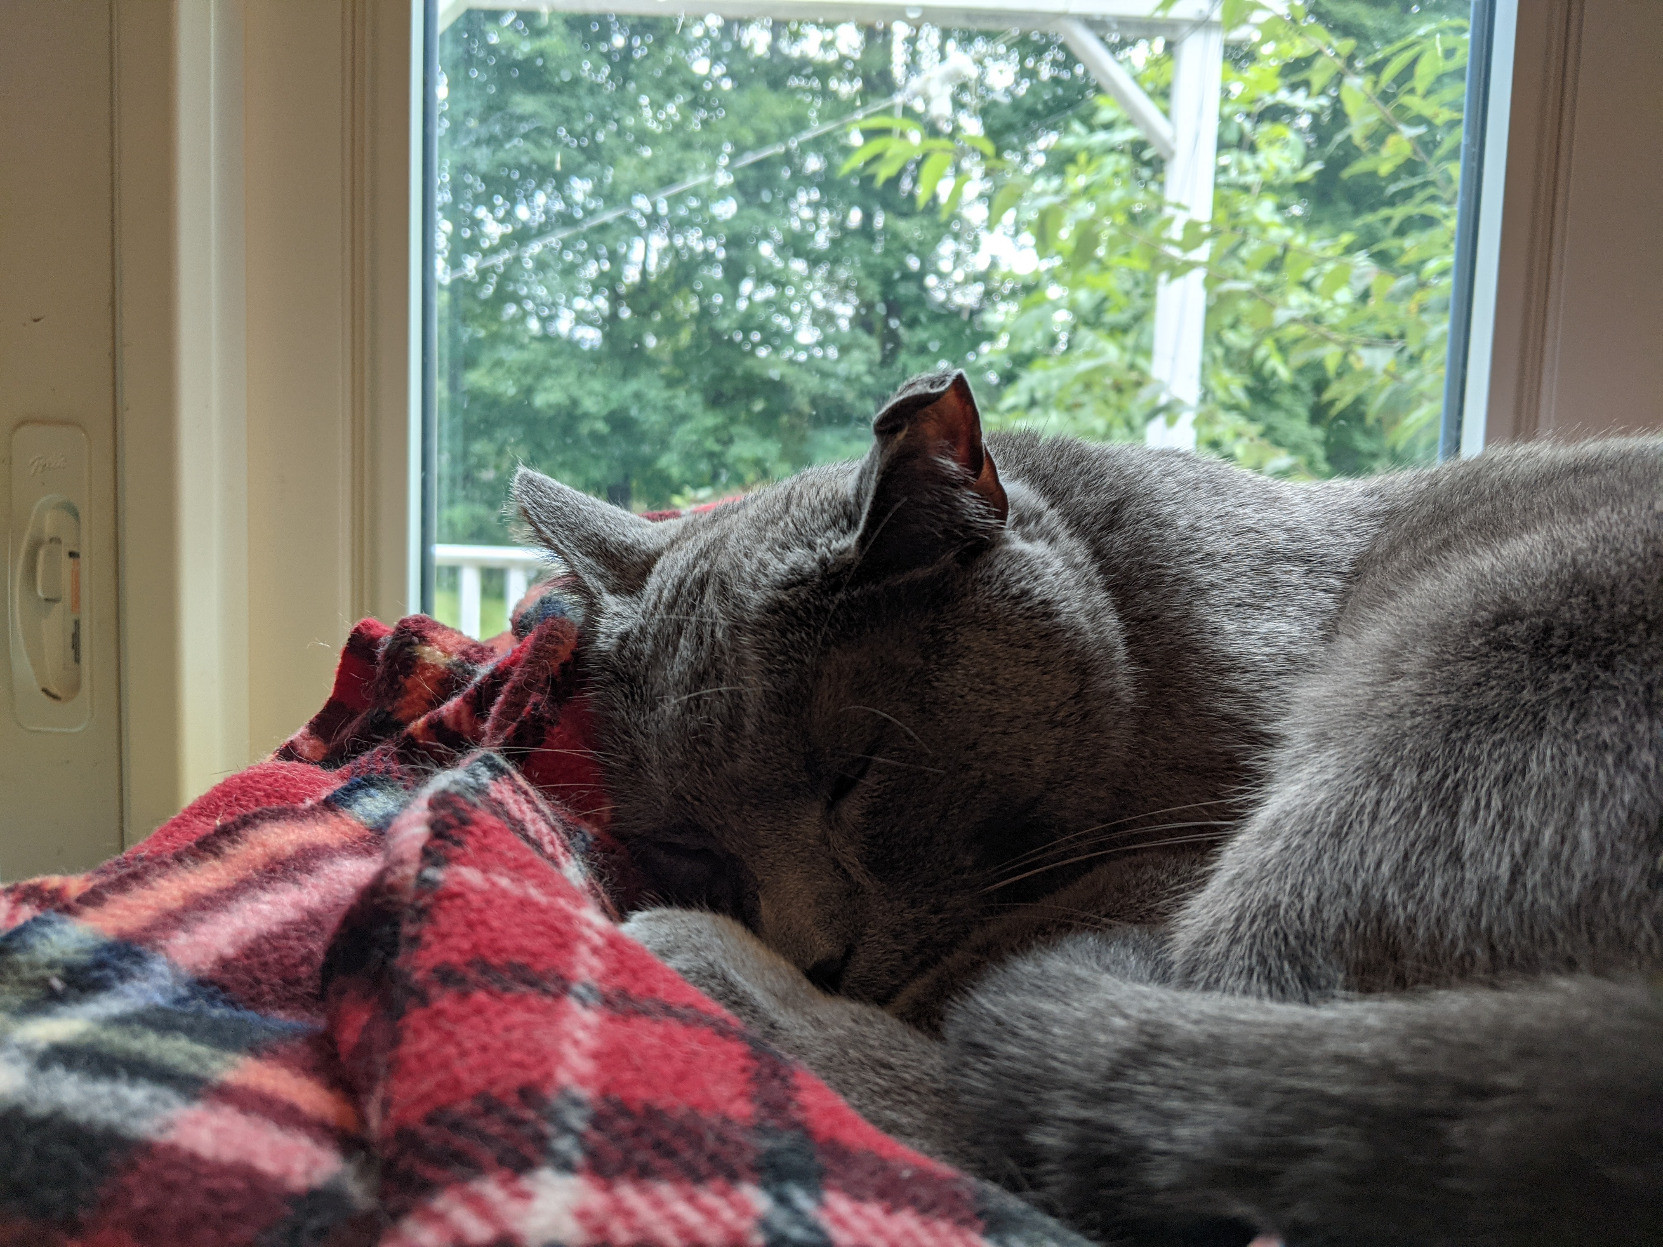 A gray cat curled up on a red flannel-covered pillow in front of a window overlooking my back yard.